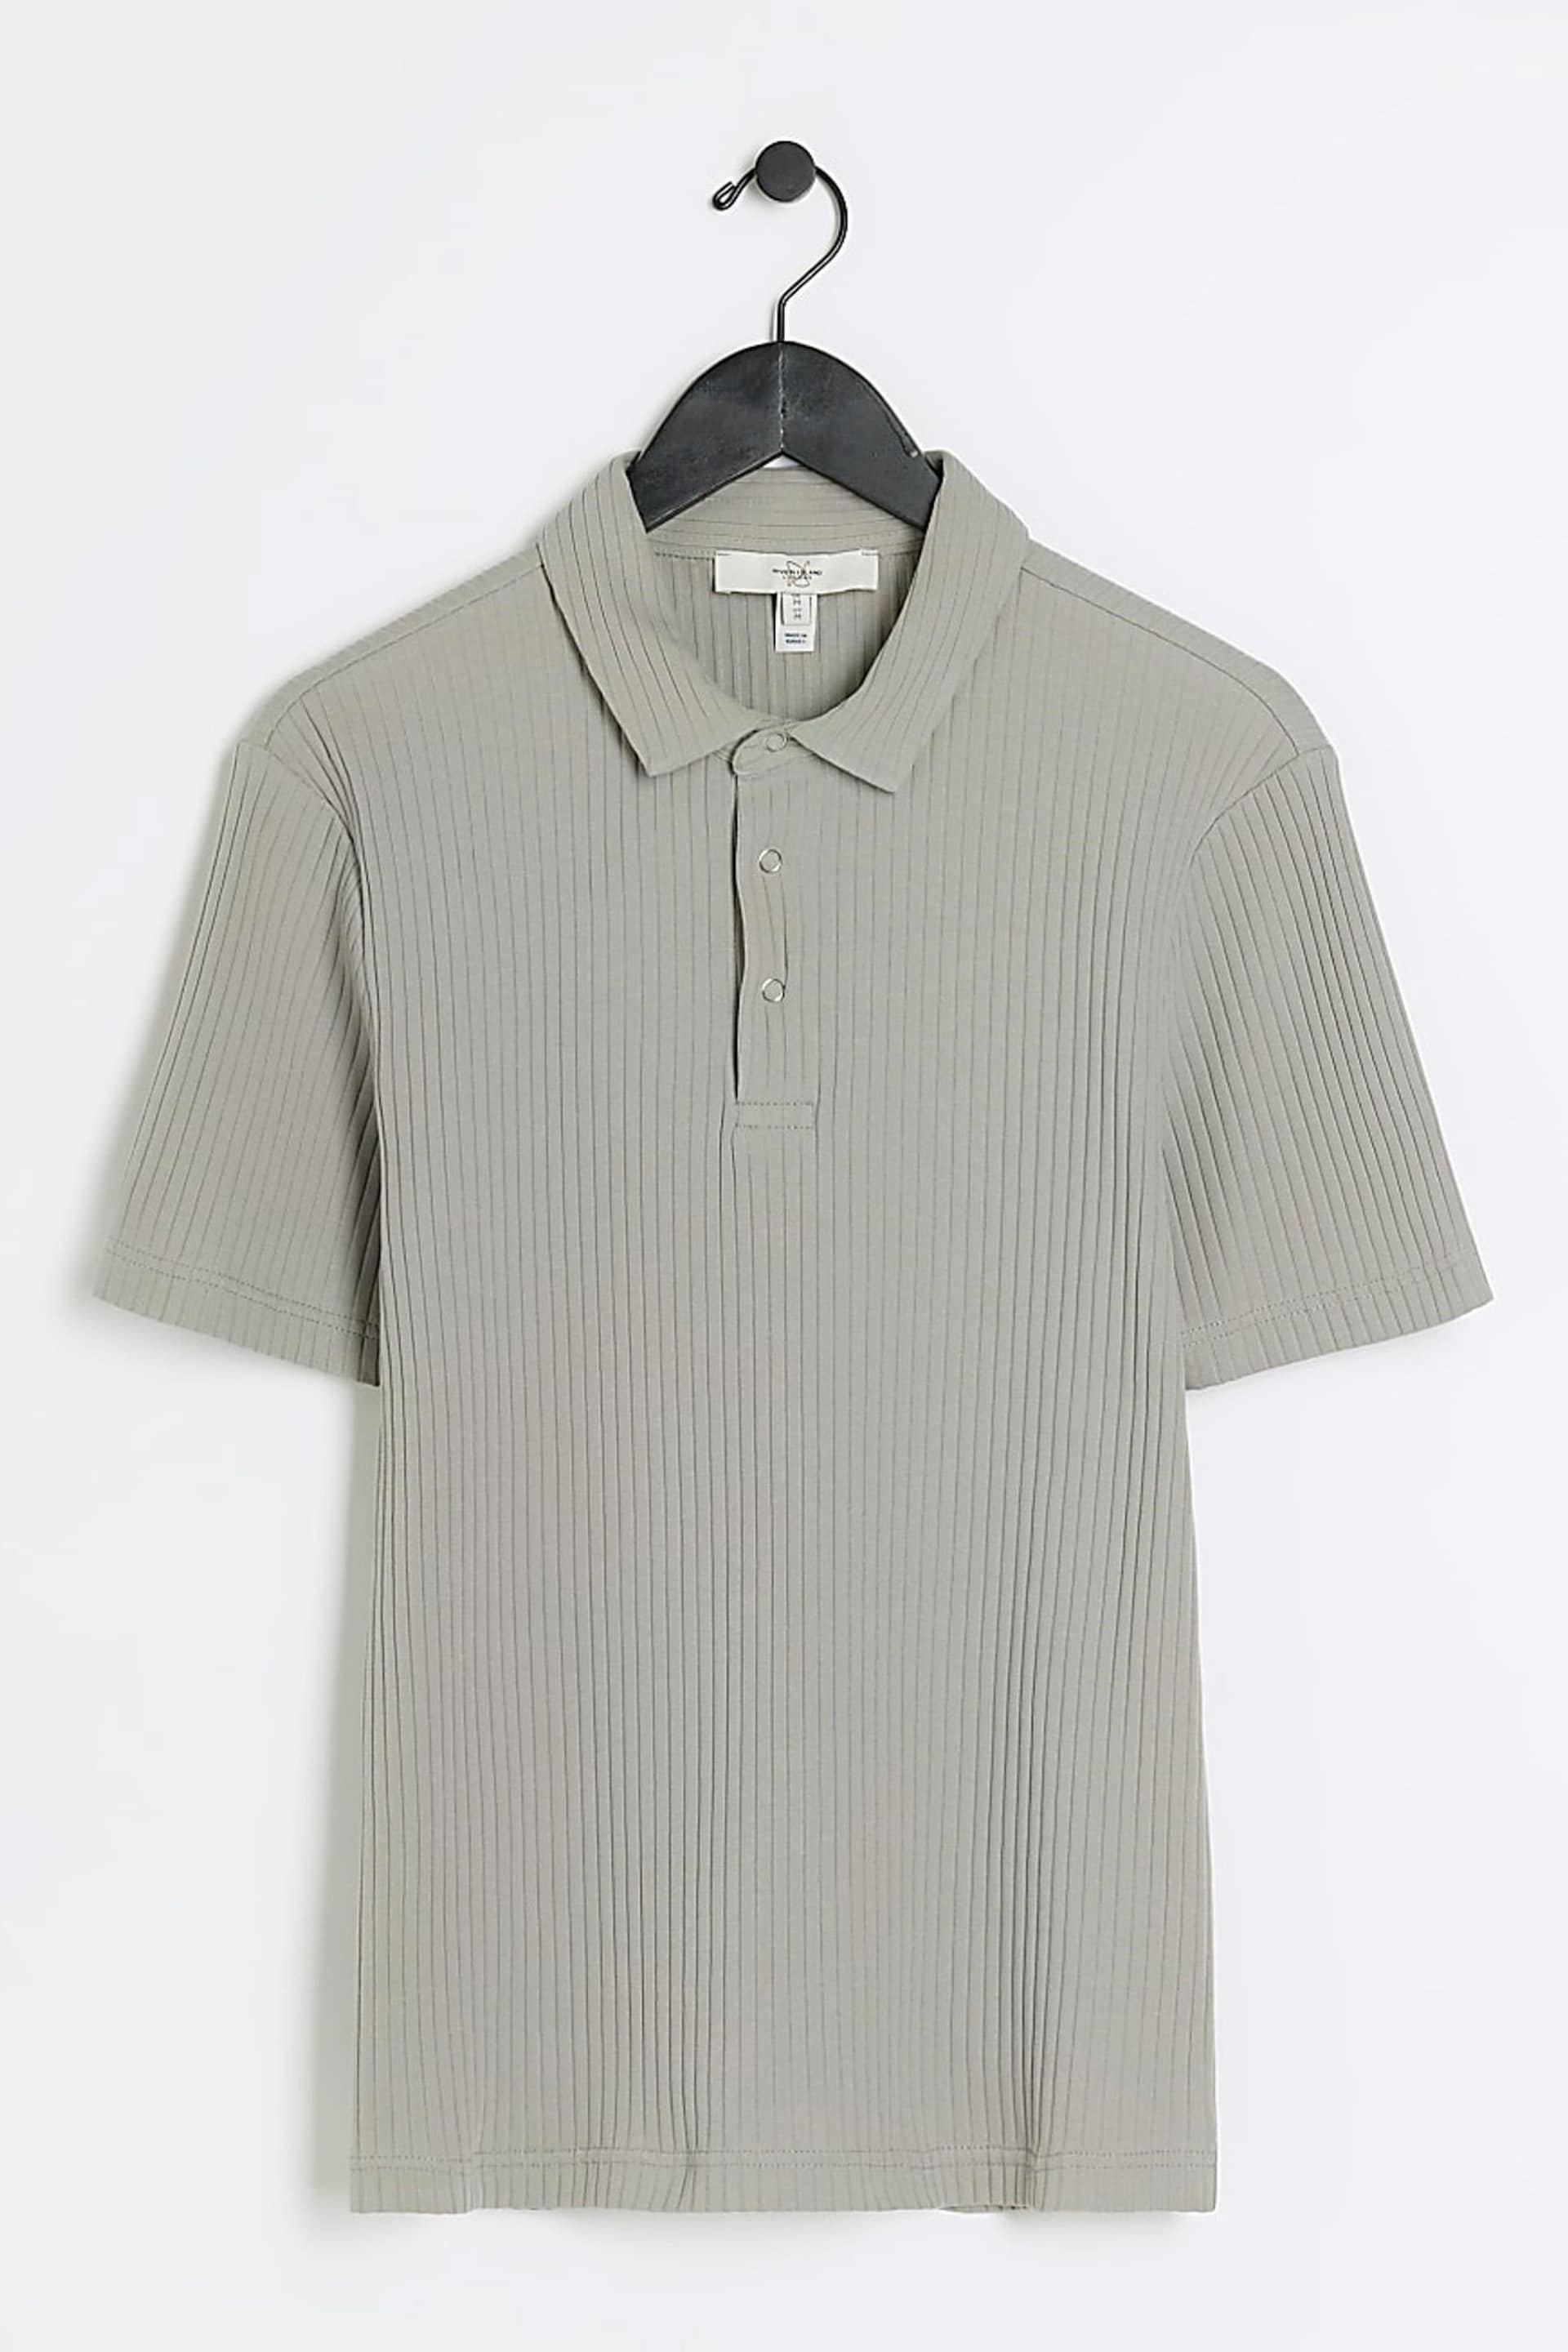 River Island Grey Muscle Fit Texture Ribbed Polo Shirt - Image 5 of 6